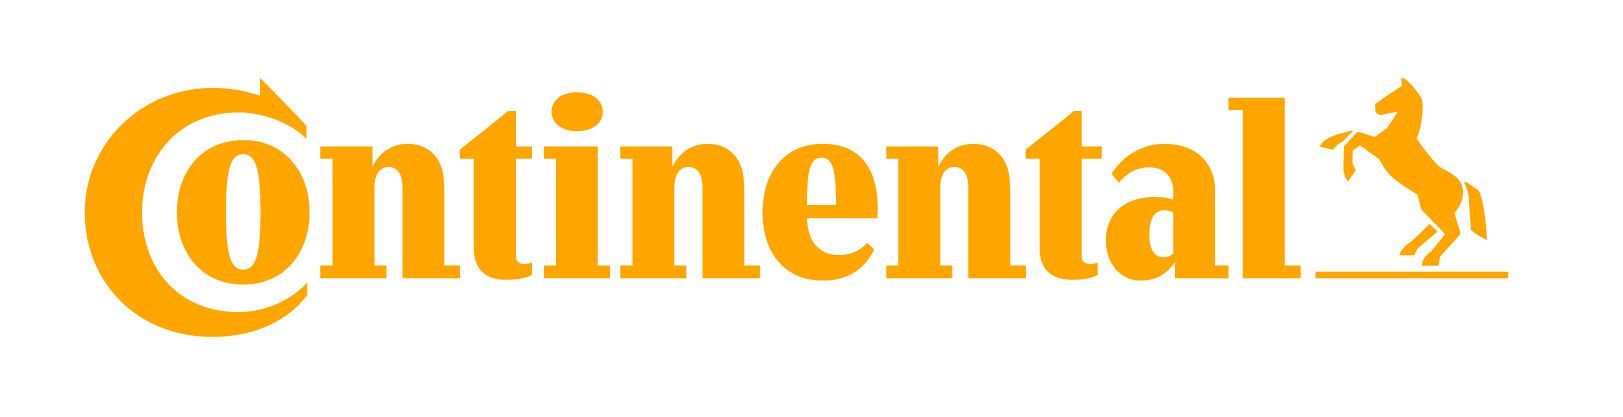 Continental Aftermarket & Services GmbH